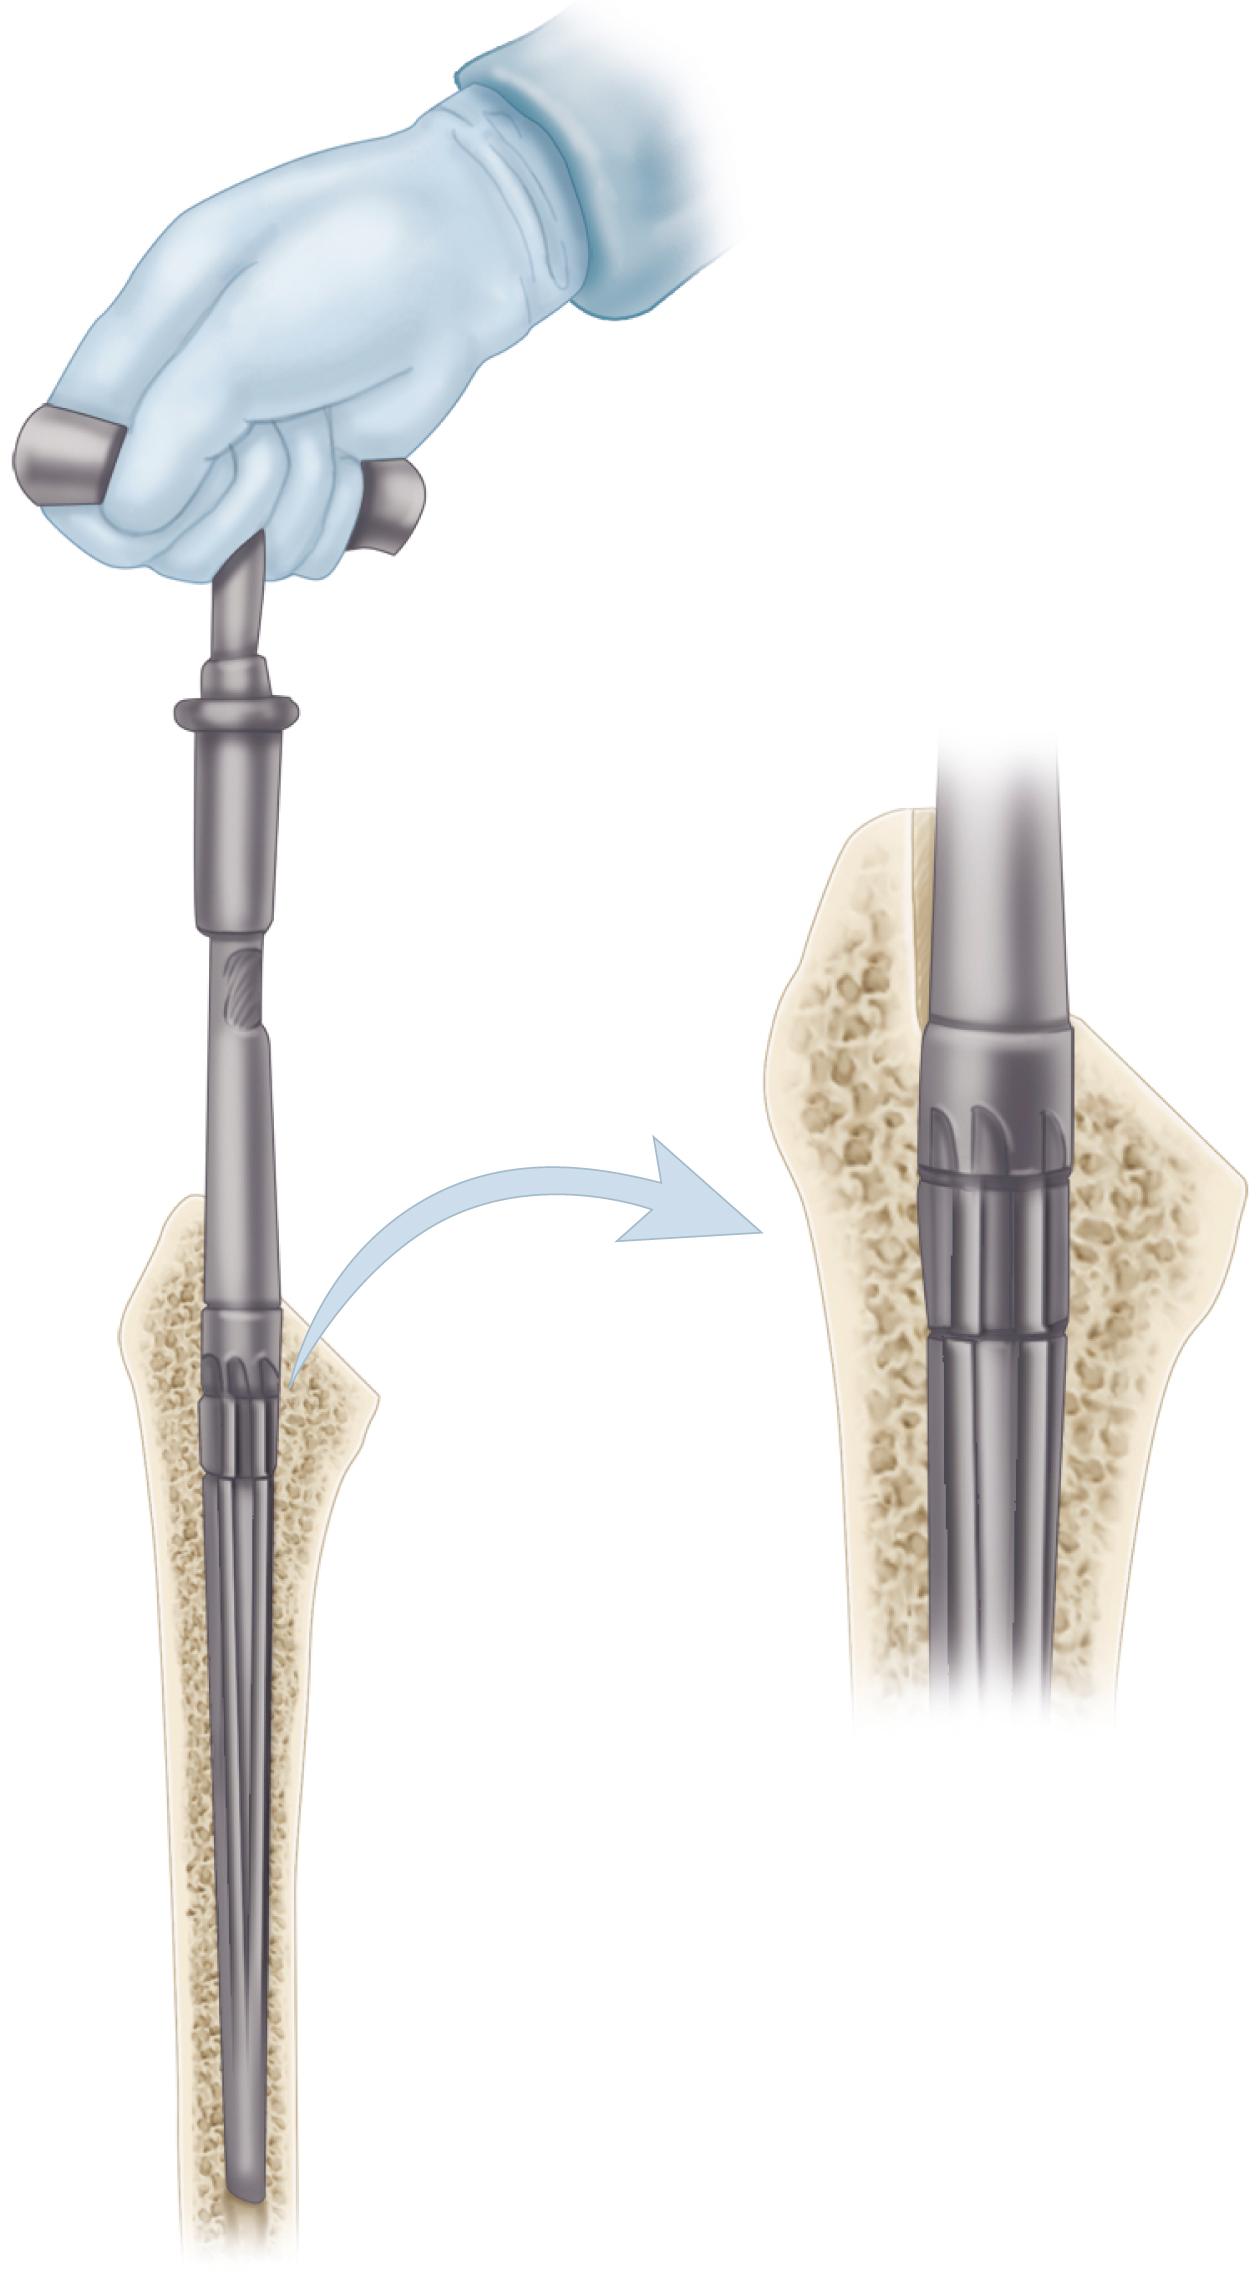 FIGURE 3.52, Reaming of femoral canal. Hand or power reamers must be lateralized into greater trochanter to maintain neutral alignment in femoral canal. (Redrawn courtesy Smith & Nephew, Memphis, TN.) SEE TECHNIQUES 3.5 AND 3.6.